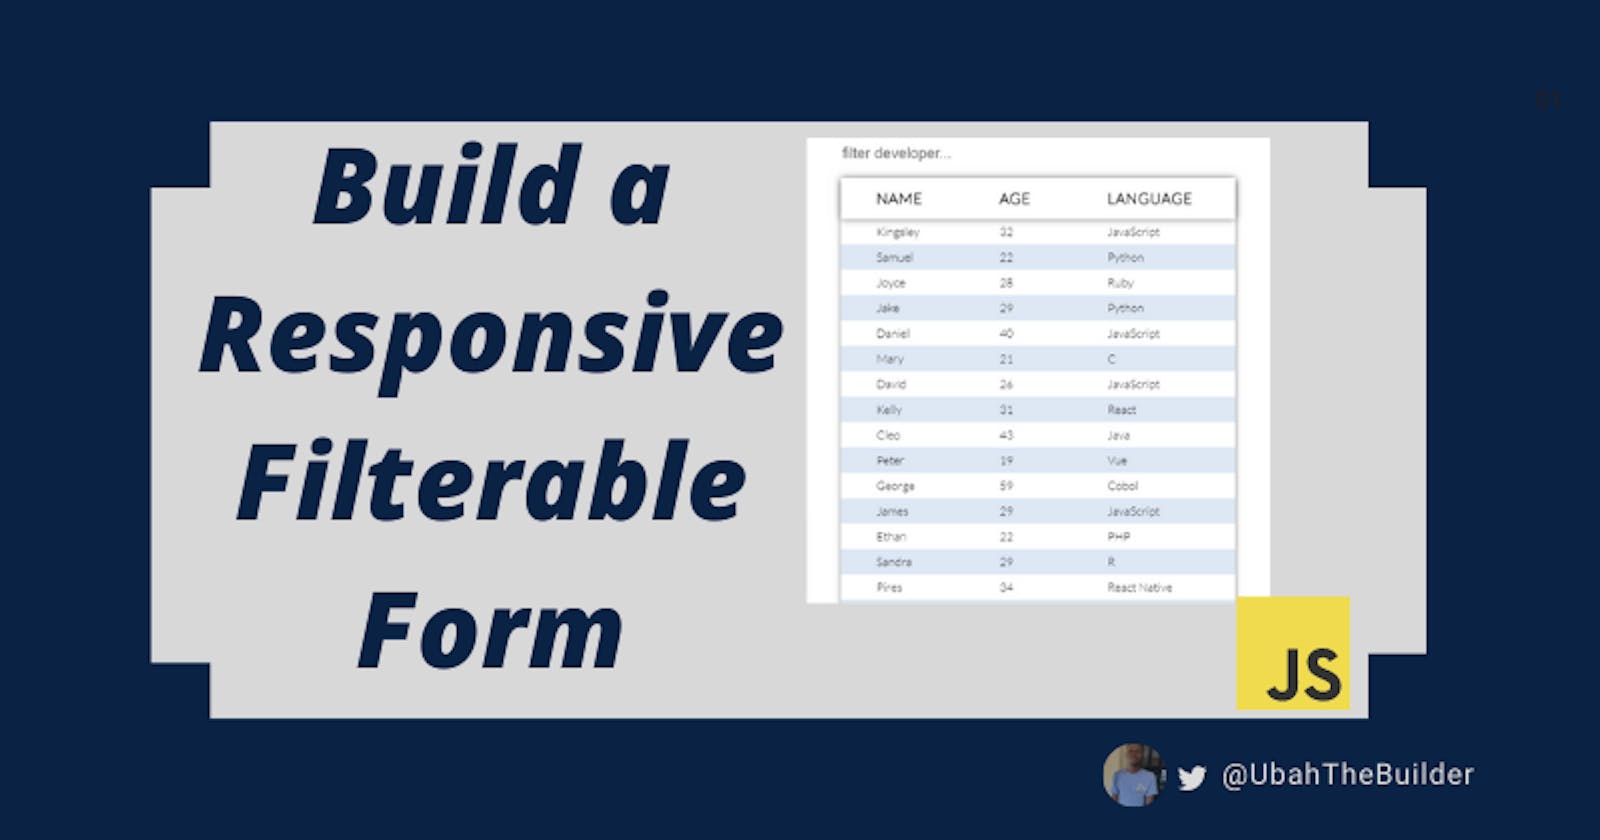 How to Build a Responsive Form with Filter Functionality Using HTML, CSS, and JavaScript